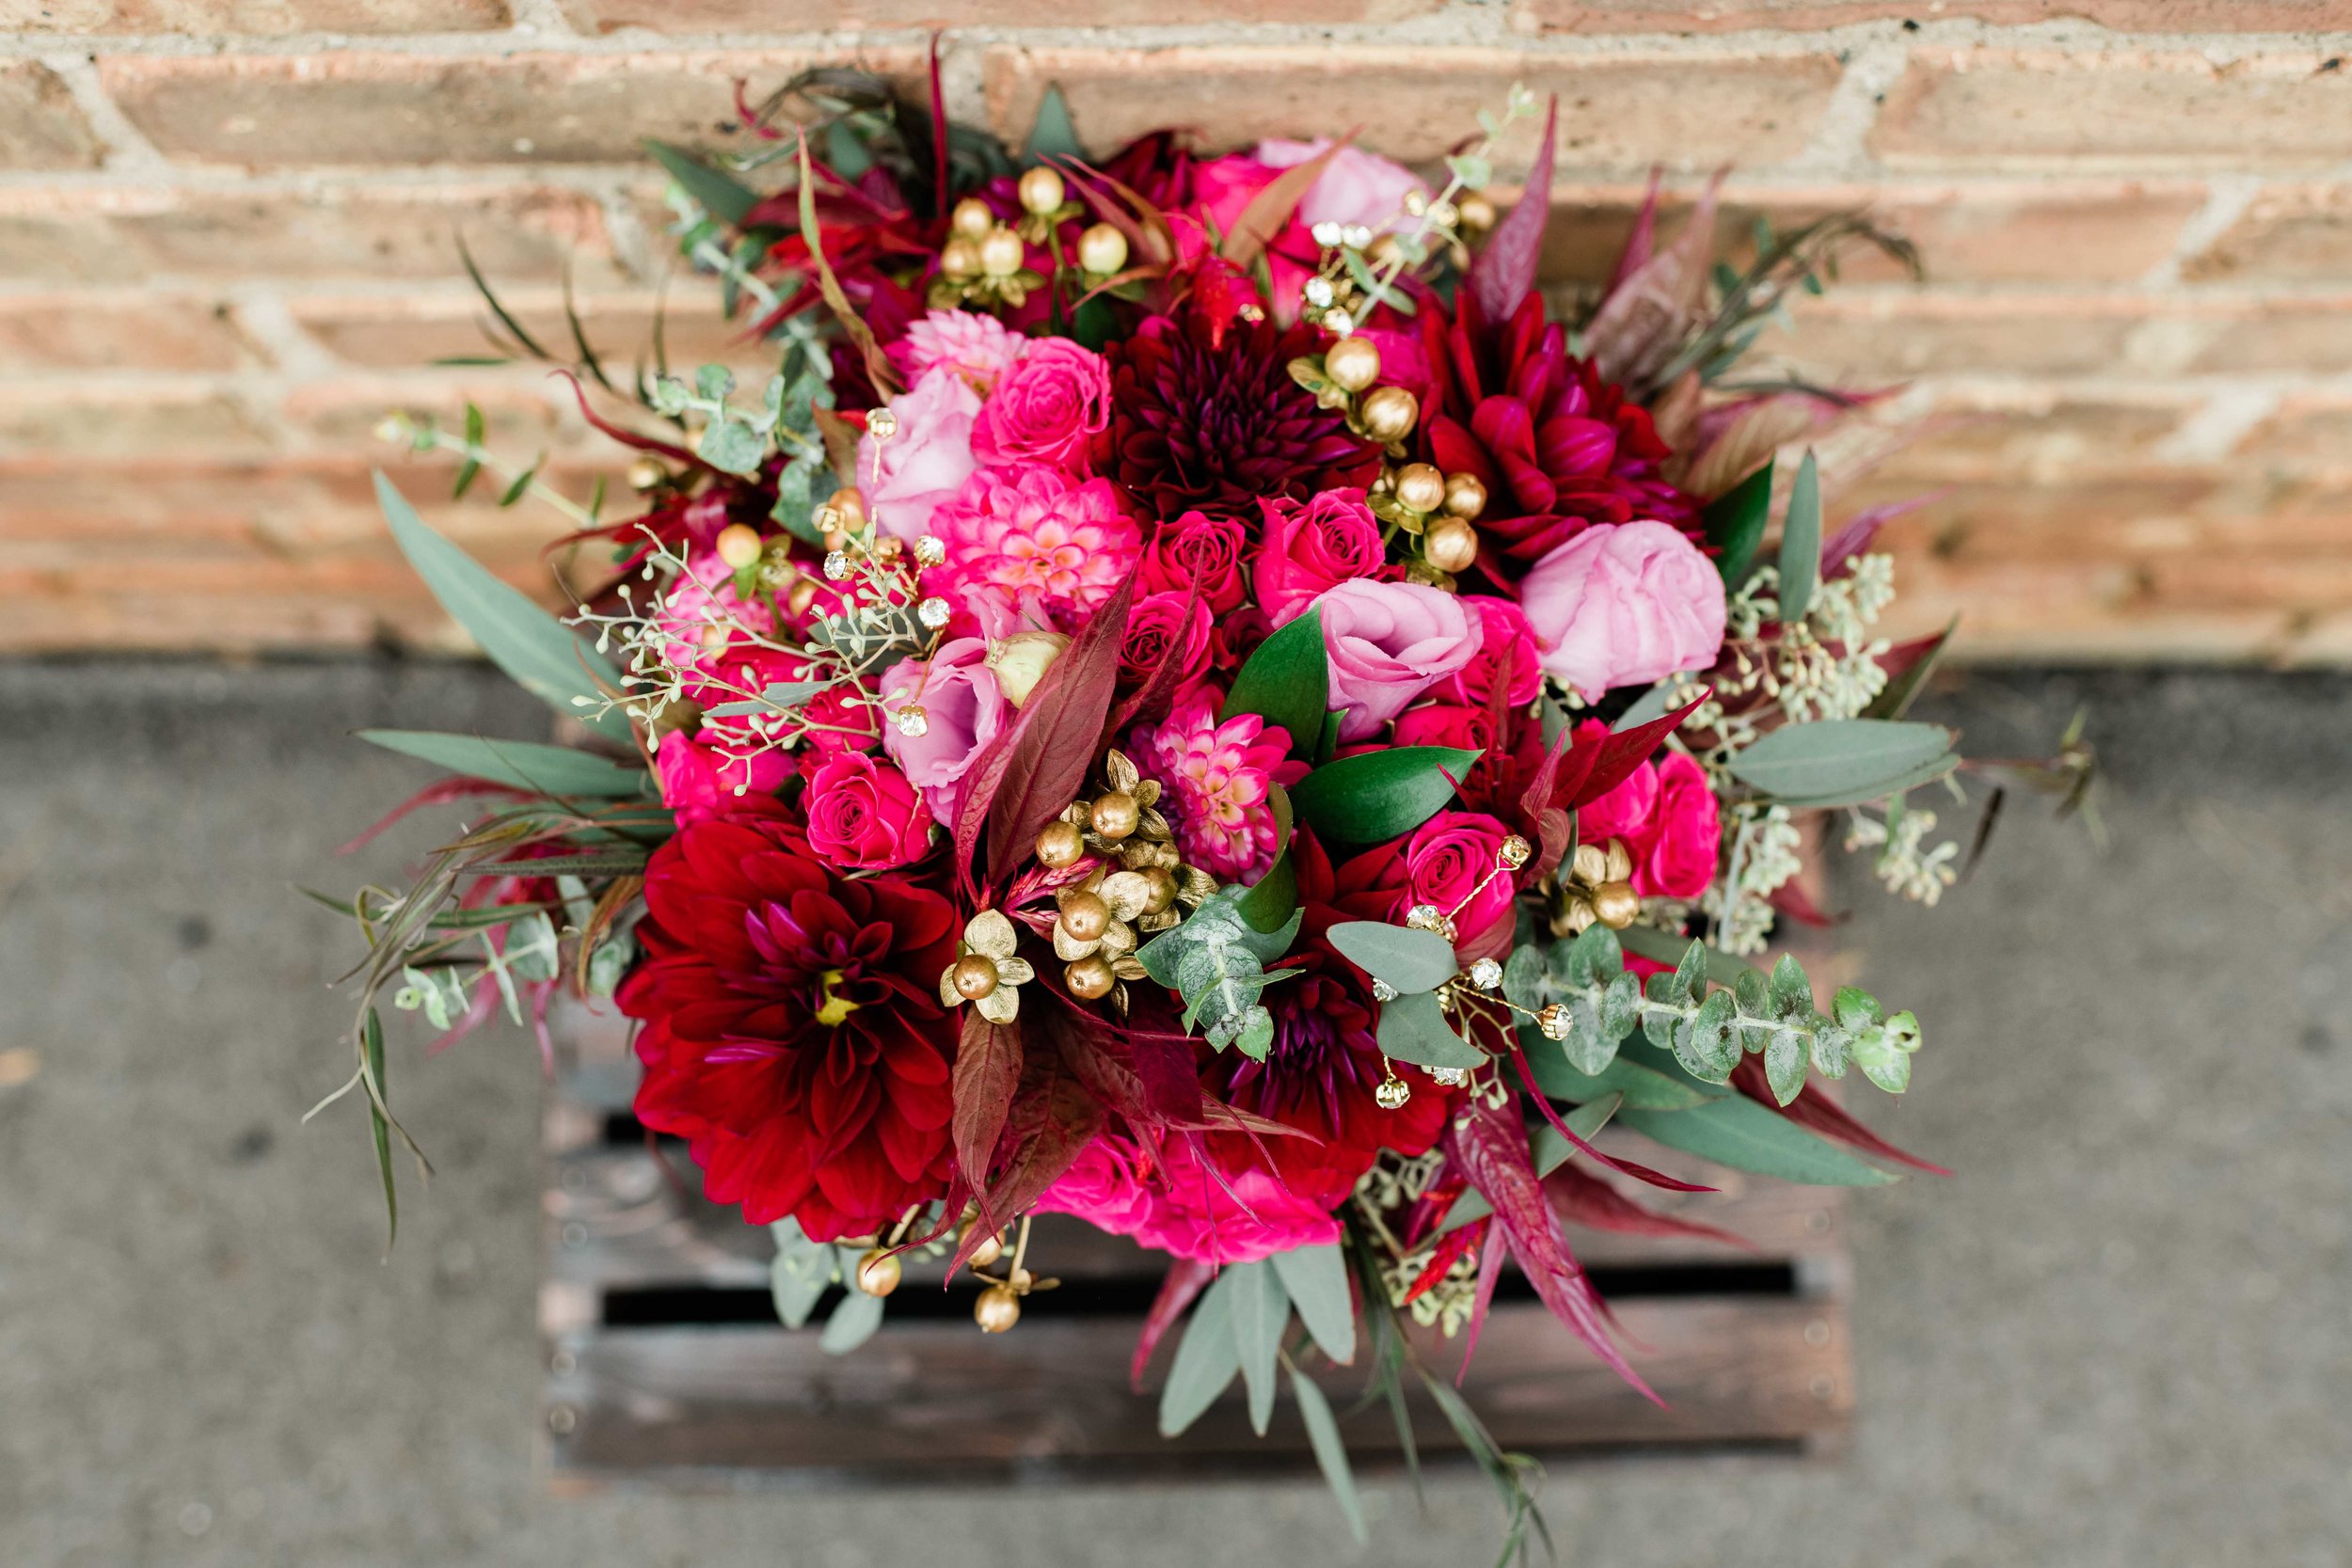 Bridal bouquet on wooden crate